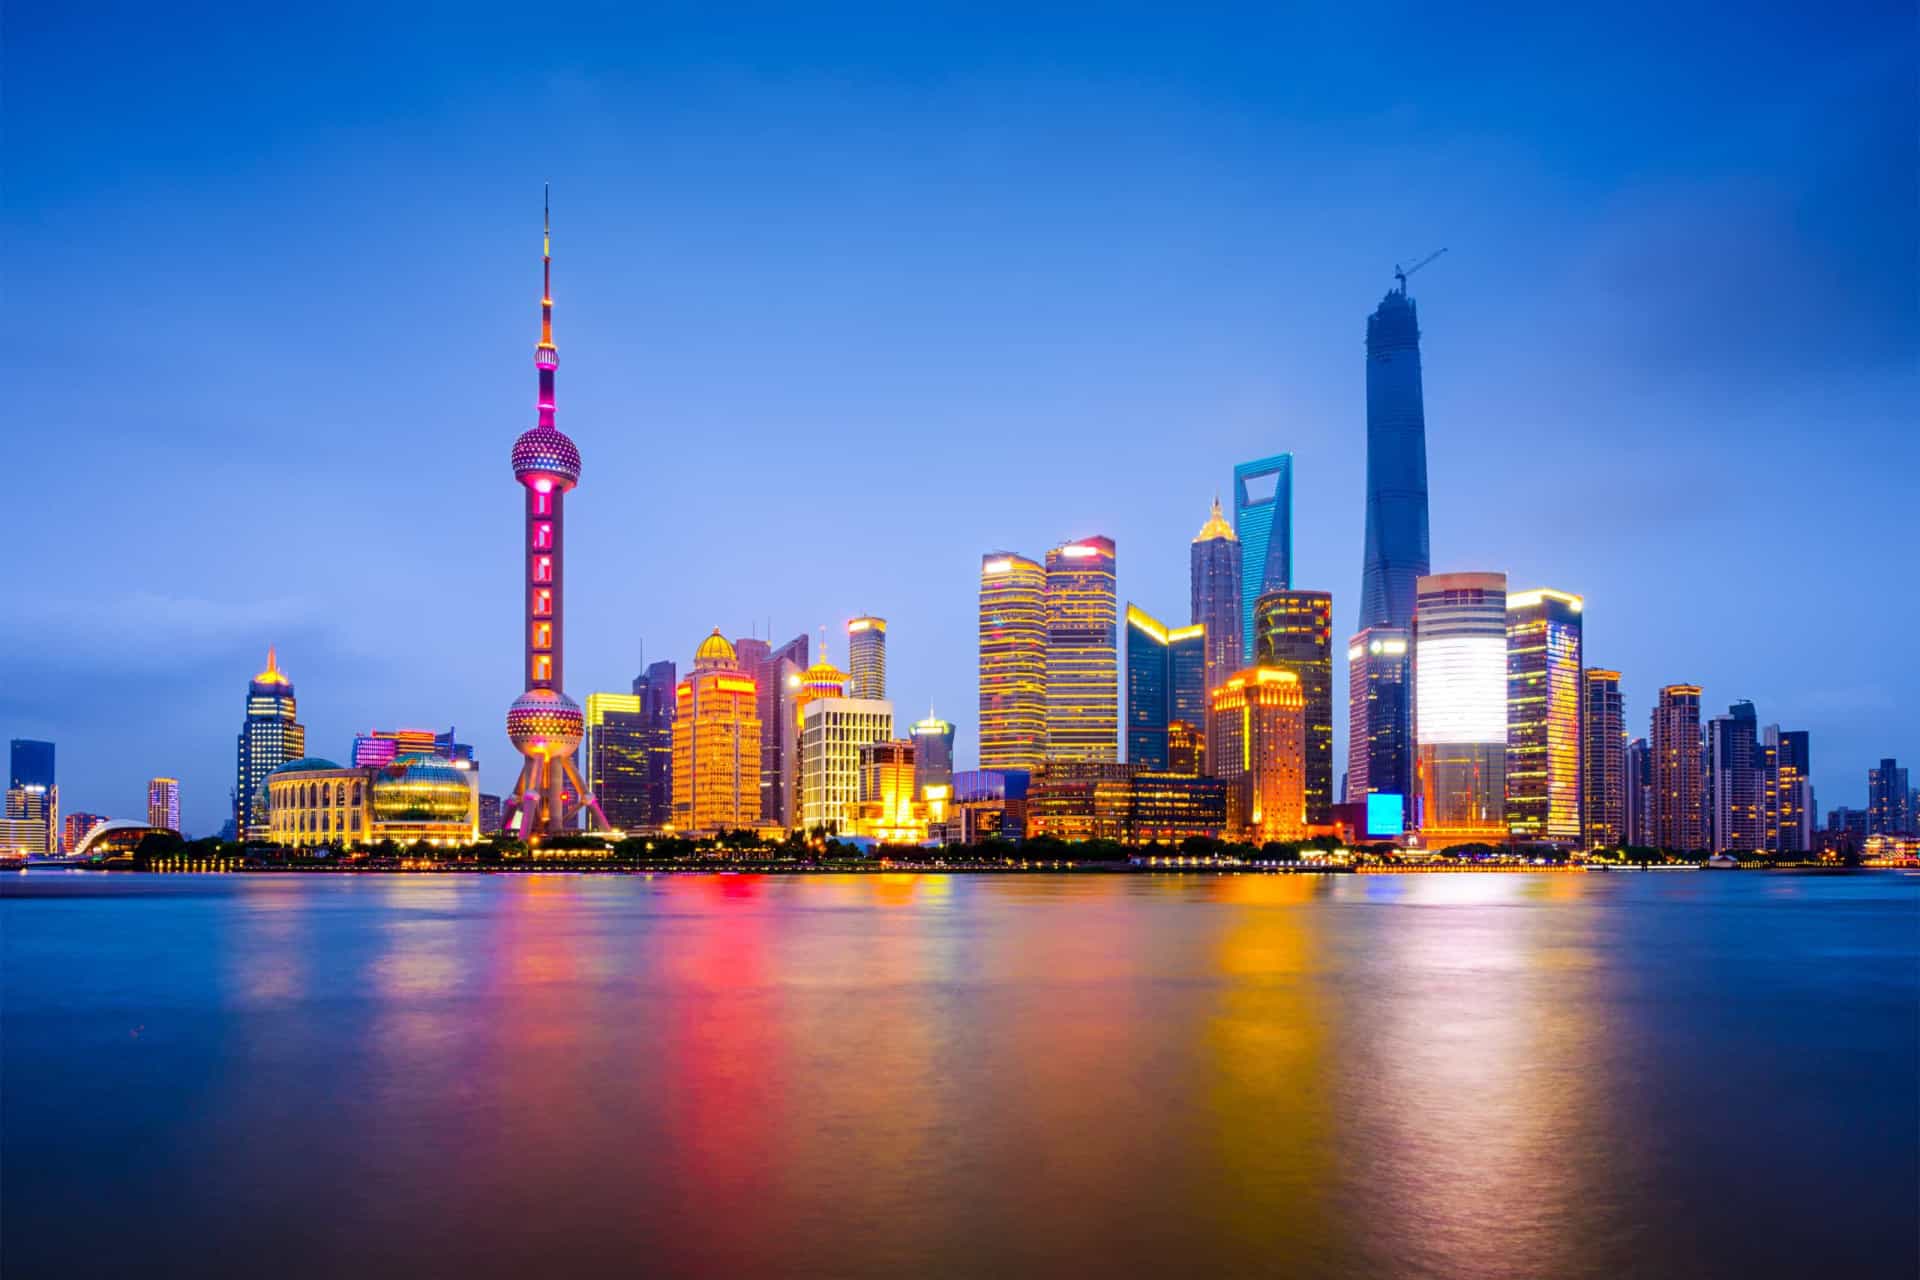 <p>Capricorns also value education and enriching experiences, so a trip to a city like Shanghai could offer them plenty of cultural things to see and local cuisine to discover.</p>